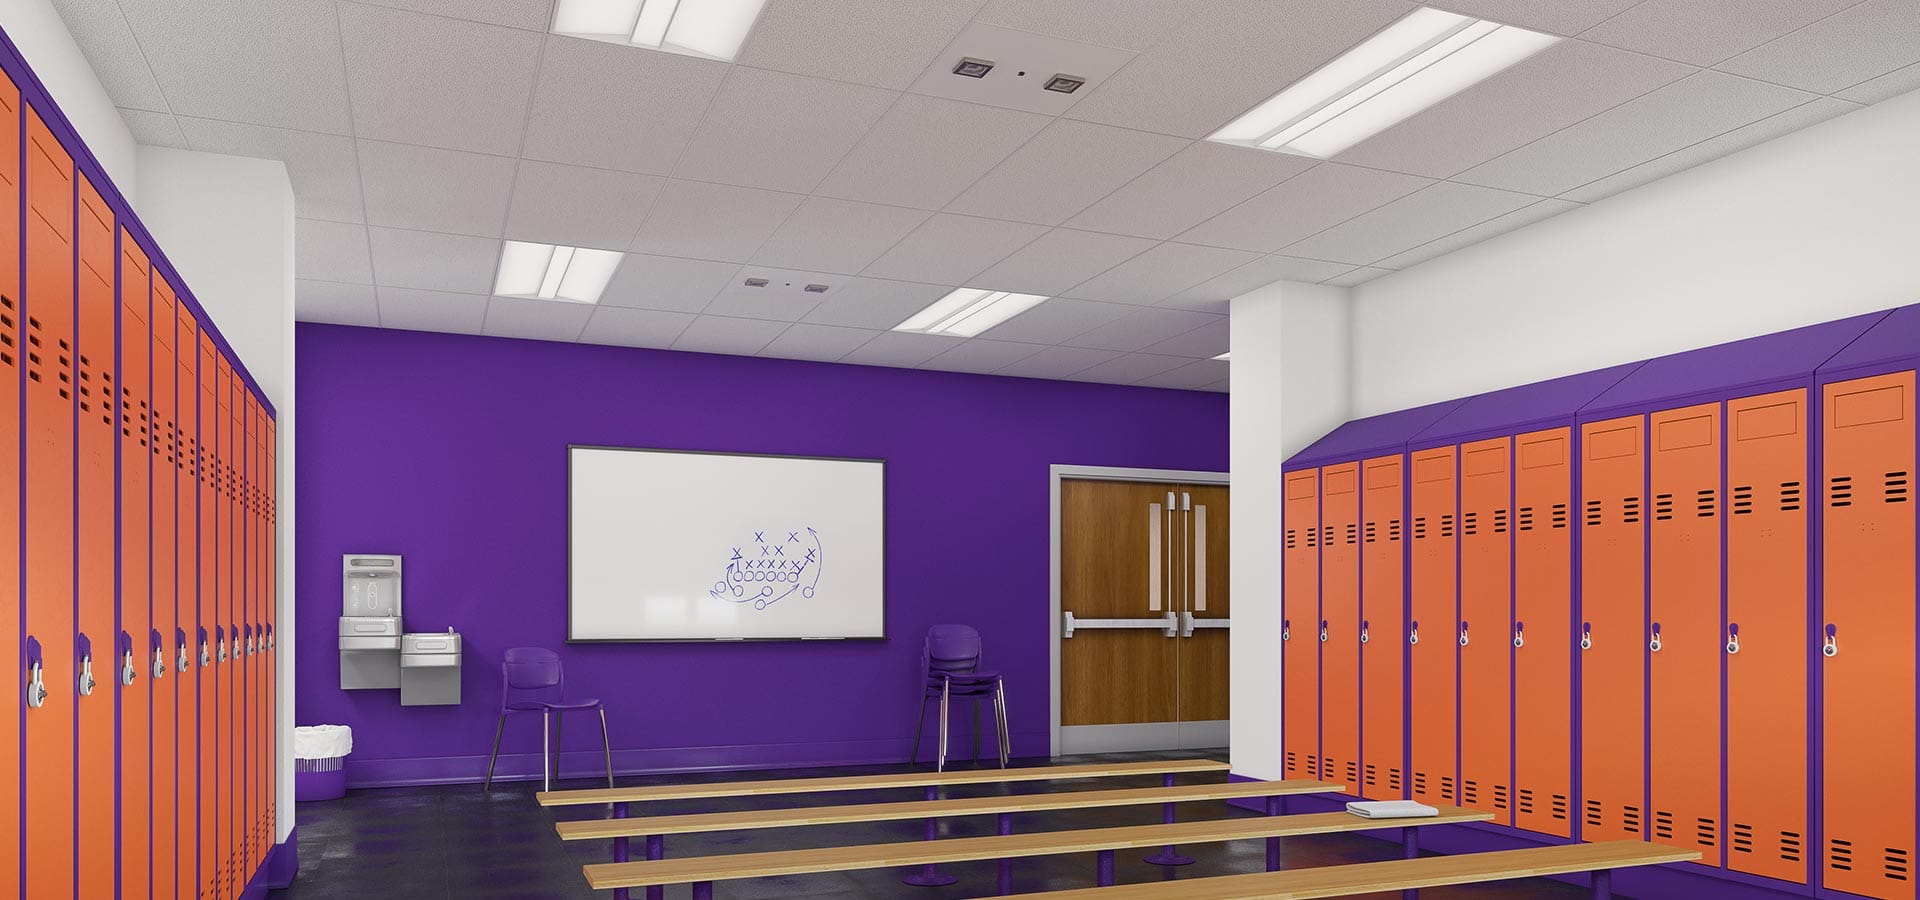 Locker room that uses light fixtures with pulsed xenon lamps for uv disinfection.